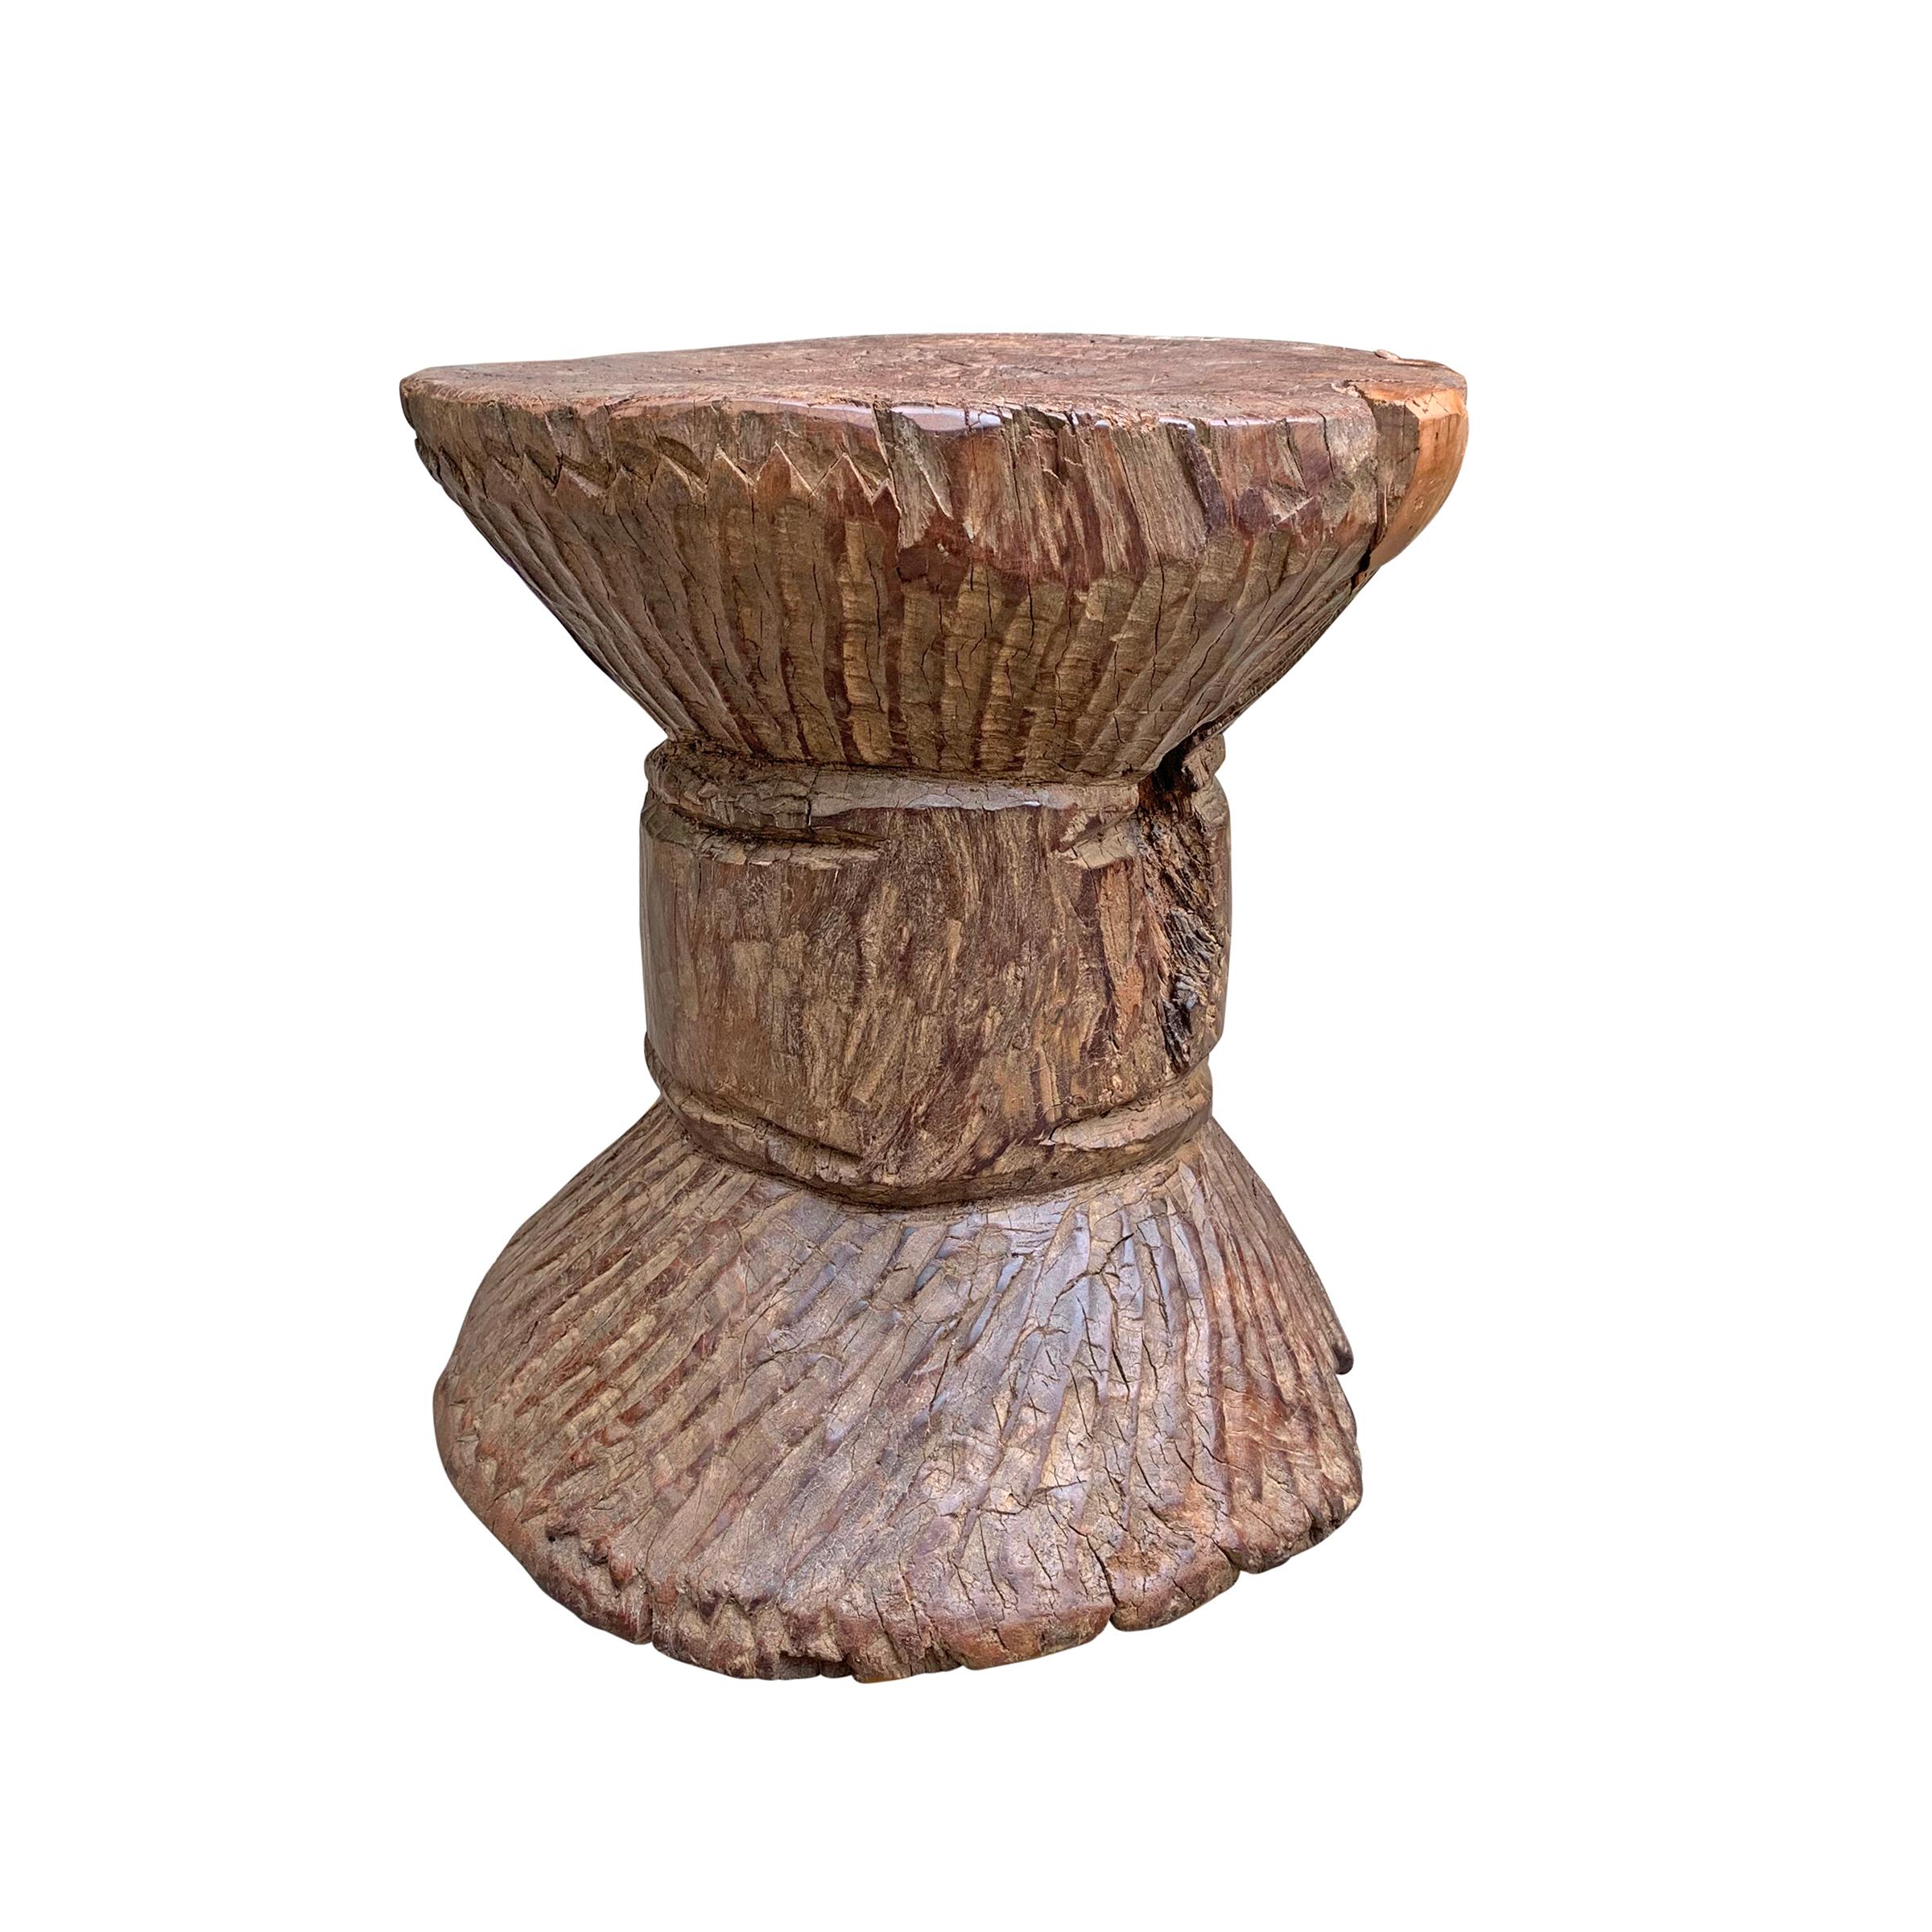 Hand-Carved Extraordinary Primitive Carved Wood Stool